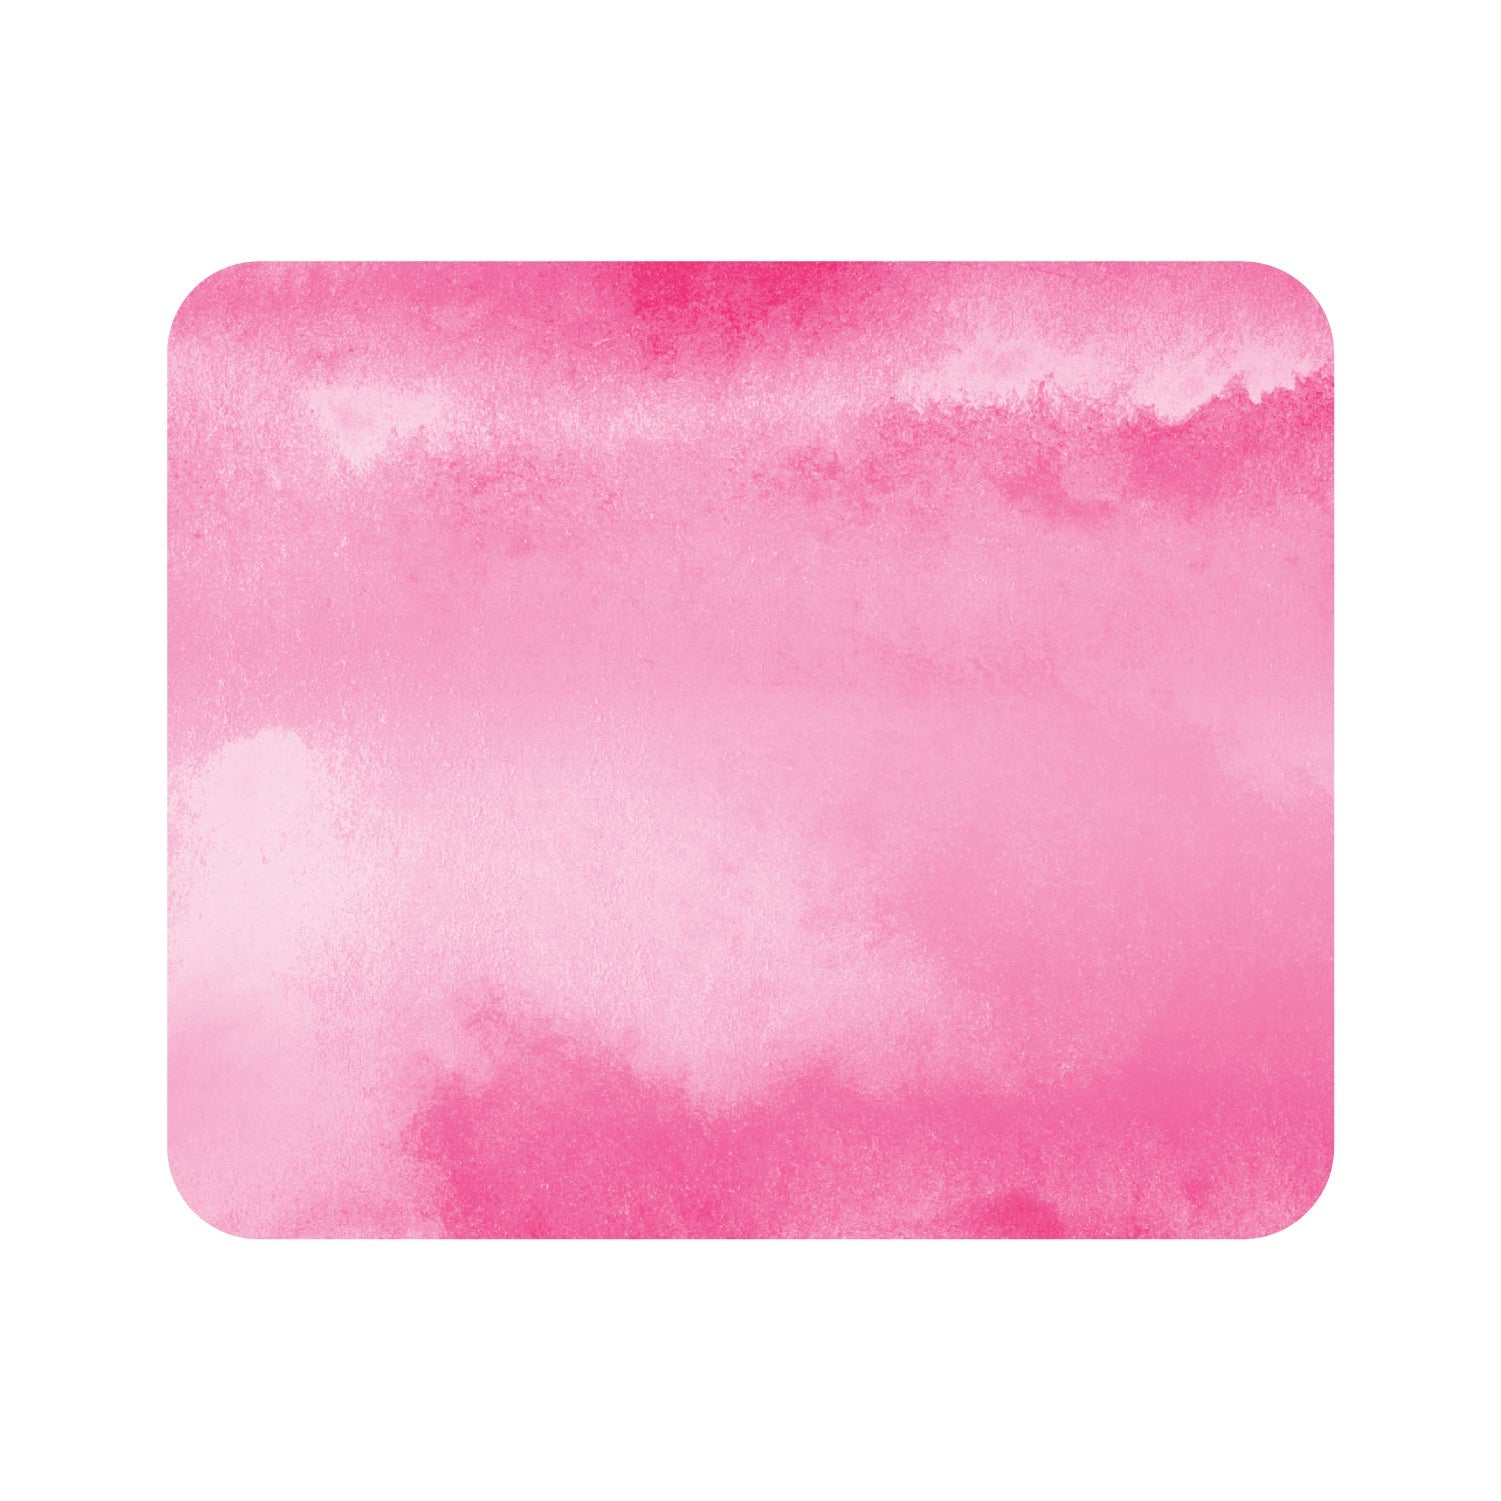 Prints Series Mouse Pad, Watercolor Pink